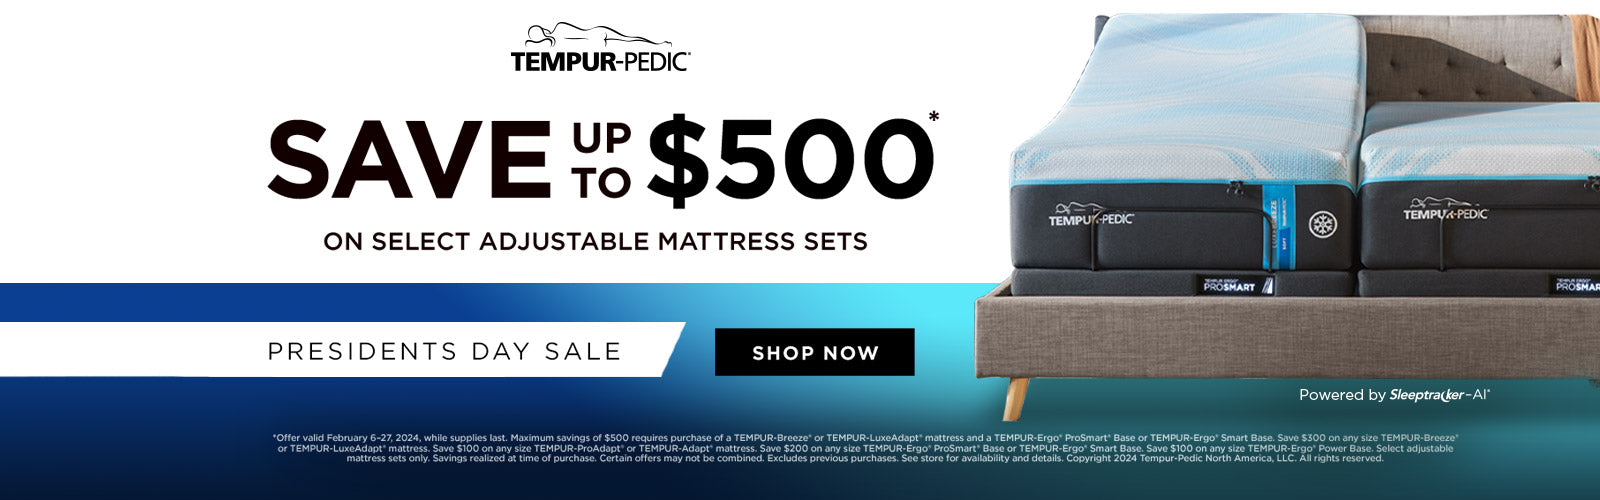 Tempur-Pedic Presidents Day Sale - Save up to $500 on Select Adjustable Mattress Sets